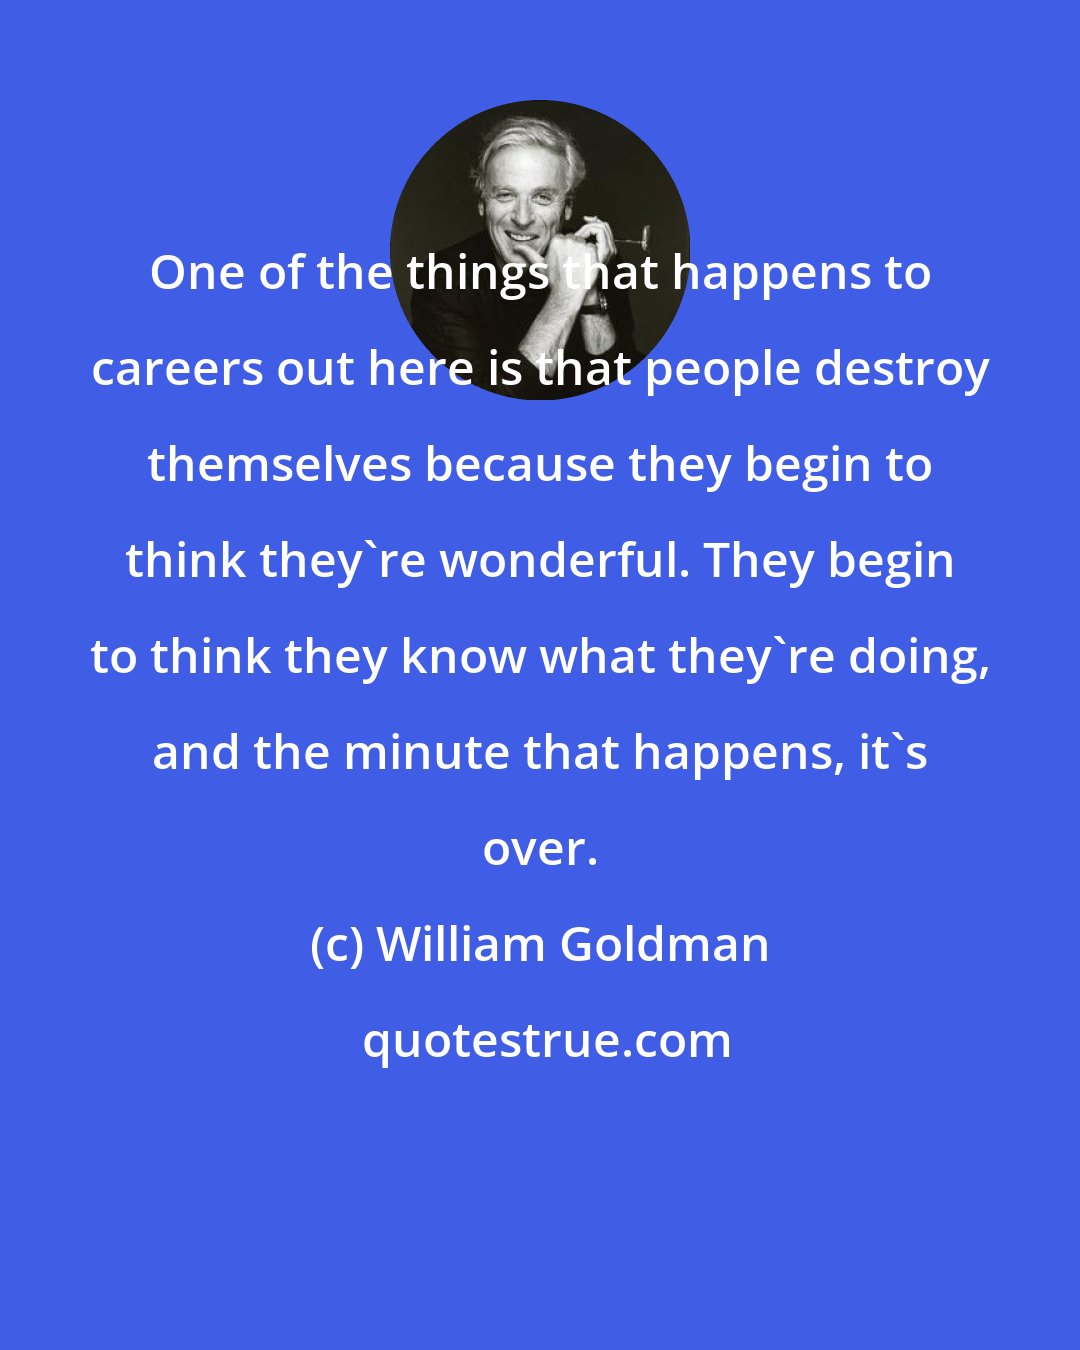 William Goldman: One of the things that happens to careers out here is that people destroy themselves because they begin to think they're wonderful. They begin to think they know what they're doing, and the minute that happens, it's over.